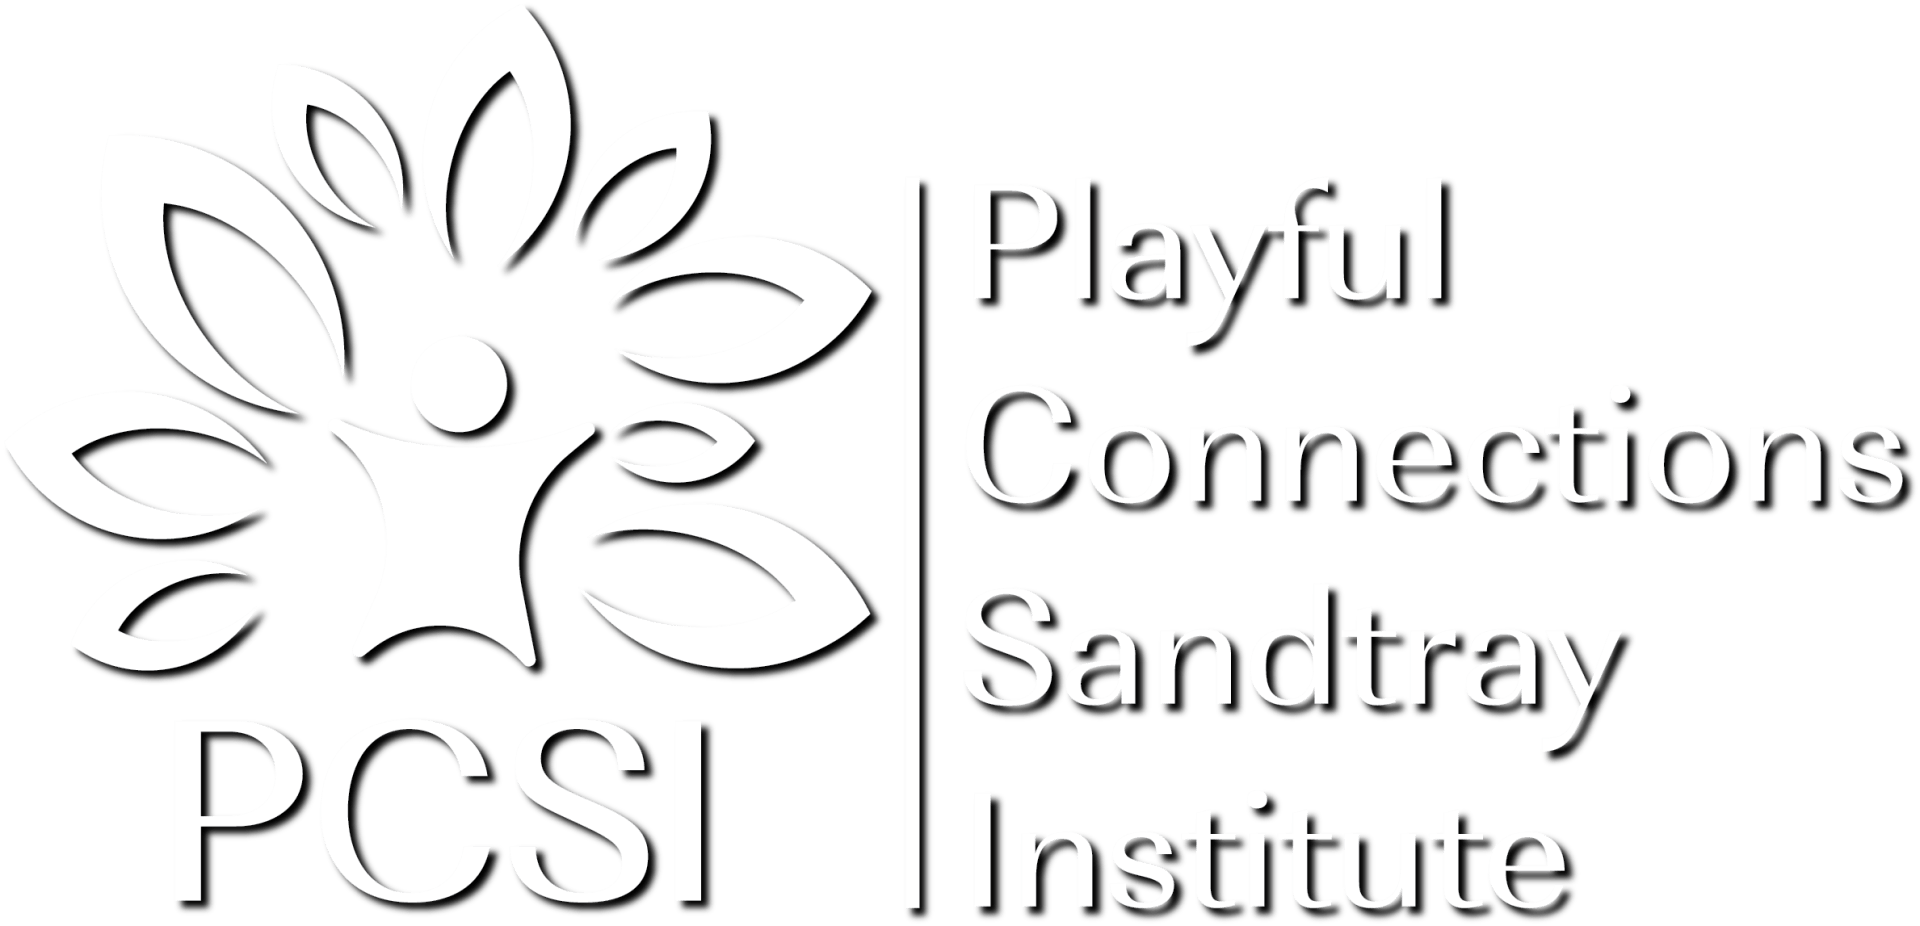 playful connections sandtray institute logo in white